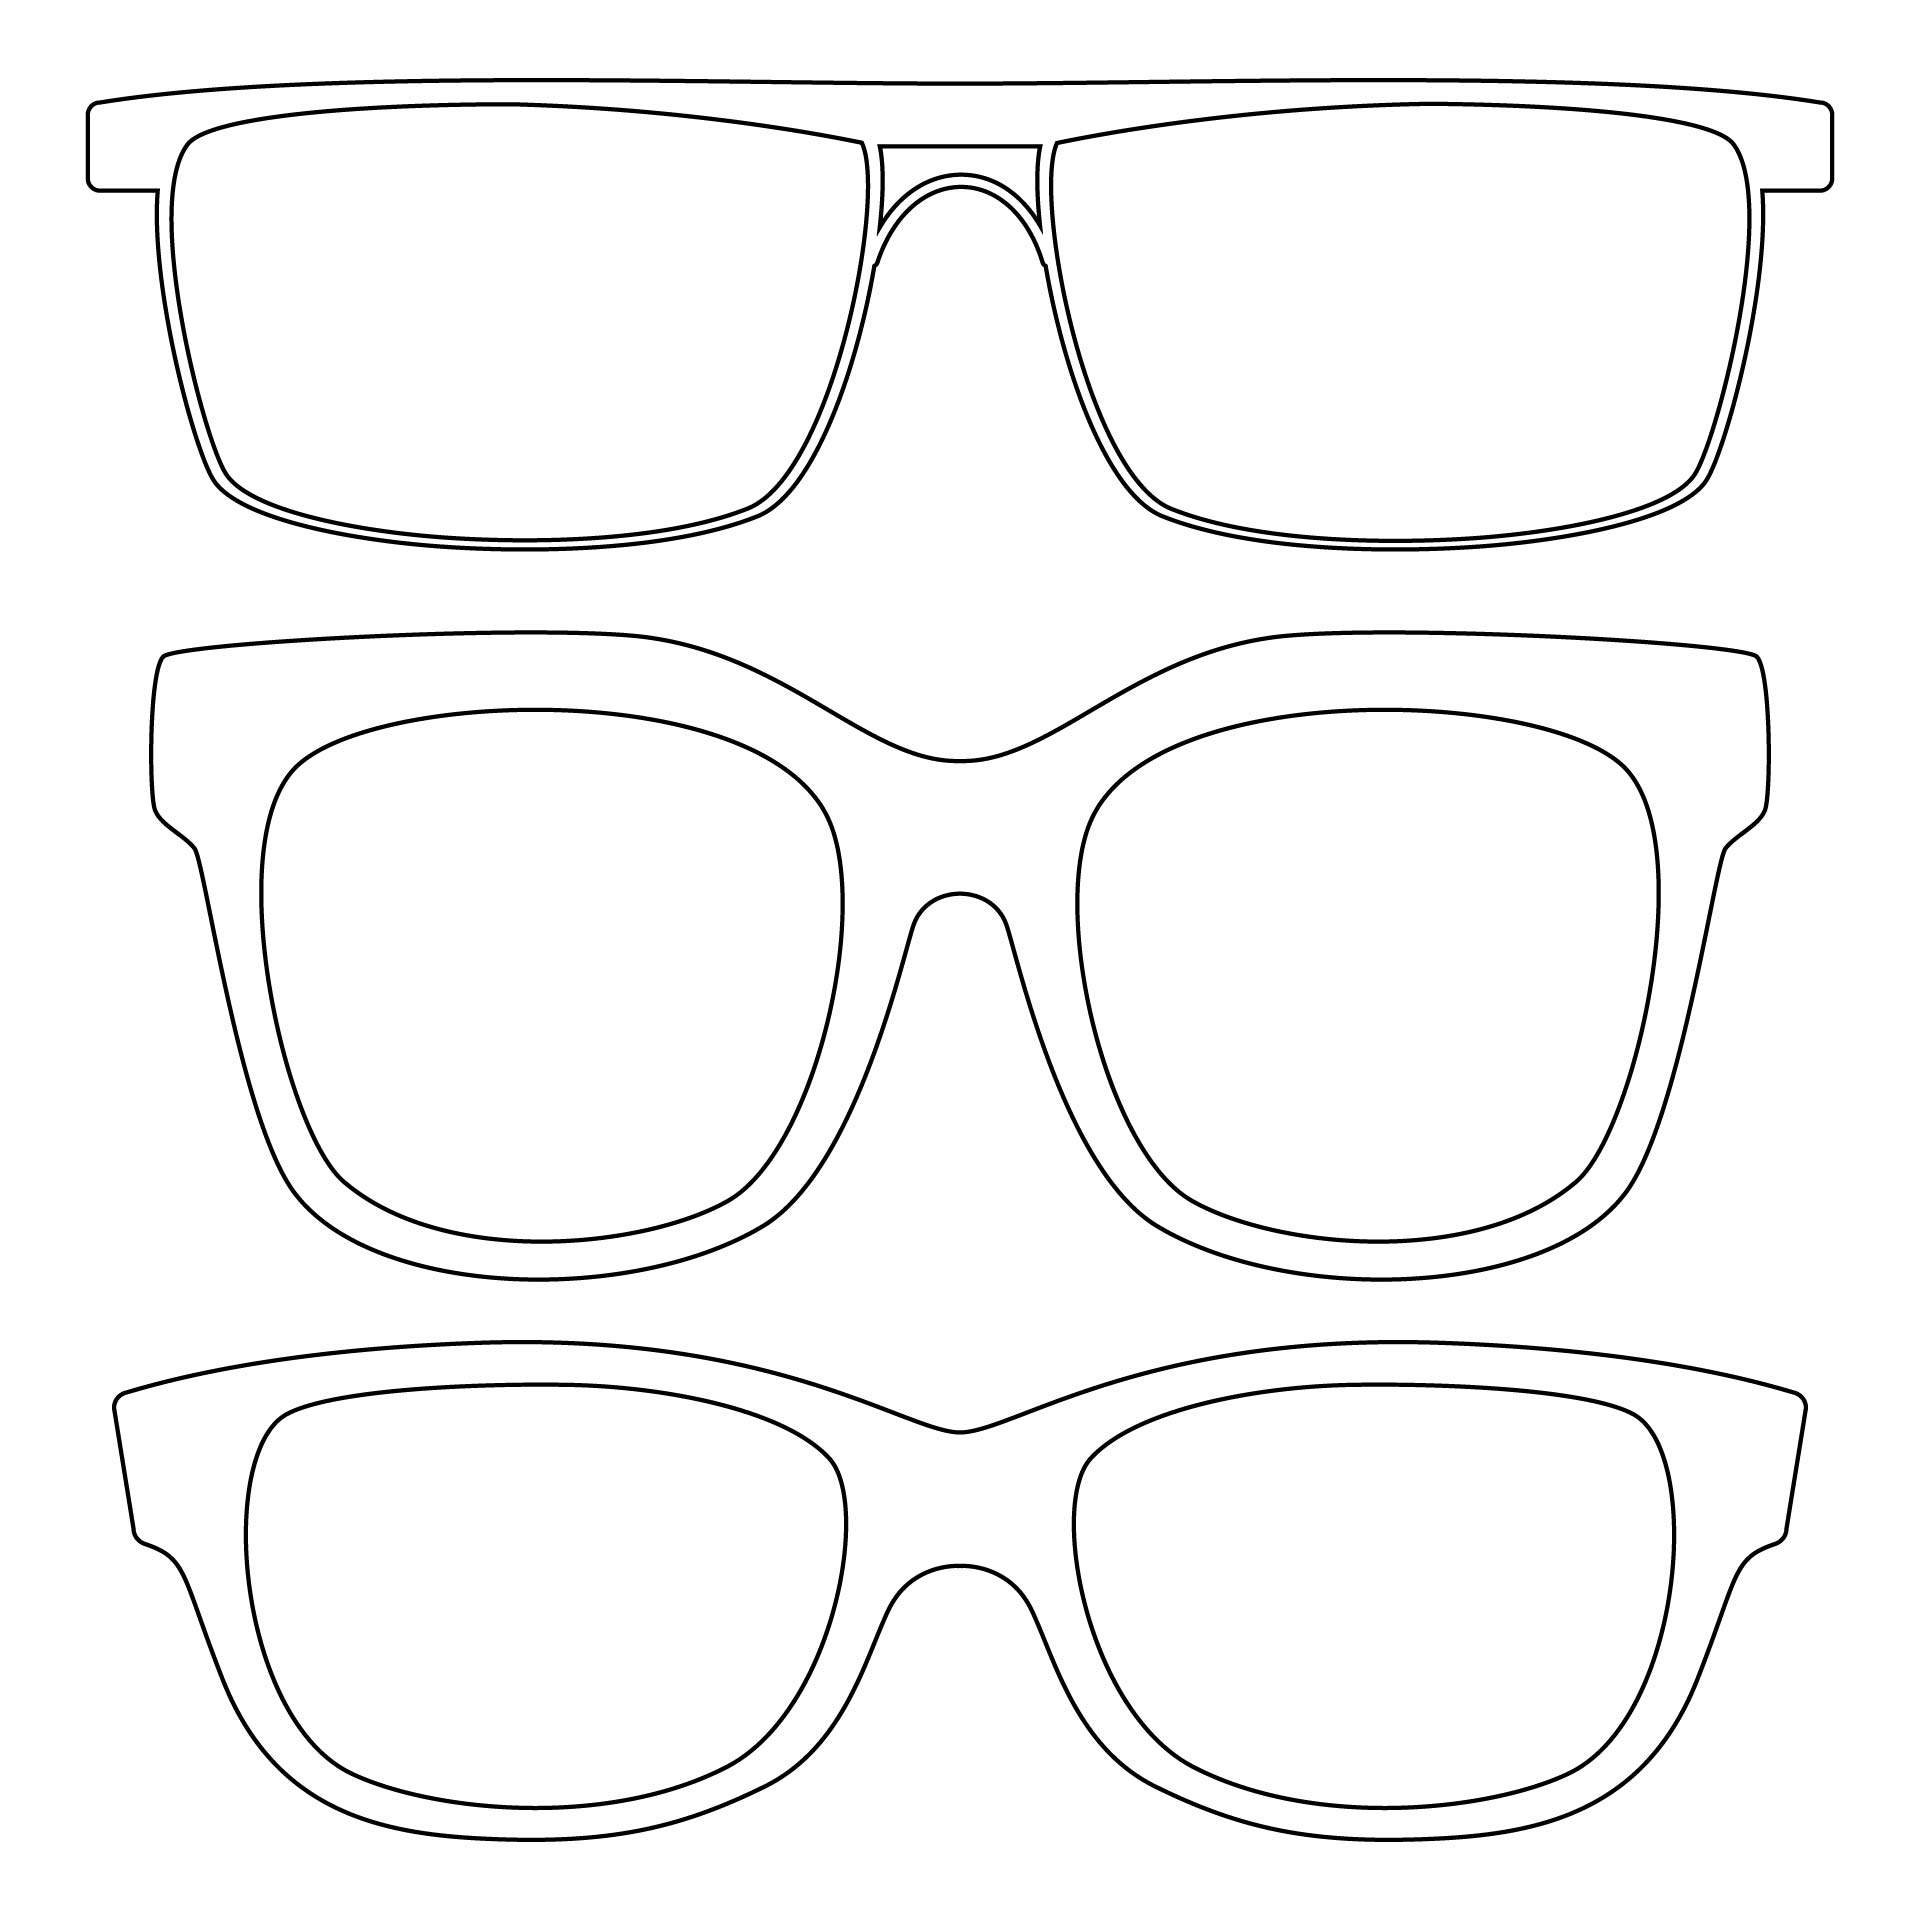 6 Best Images of Sun Glasses Outline Printable - Sunglasses Outline ...